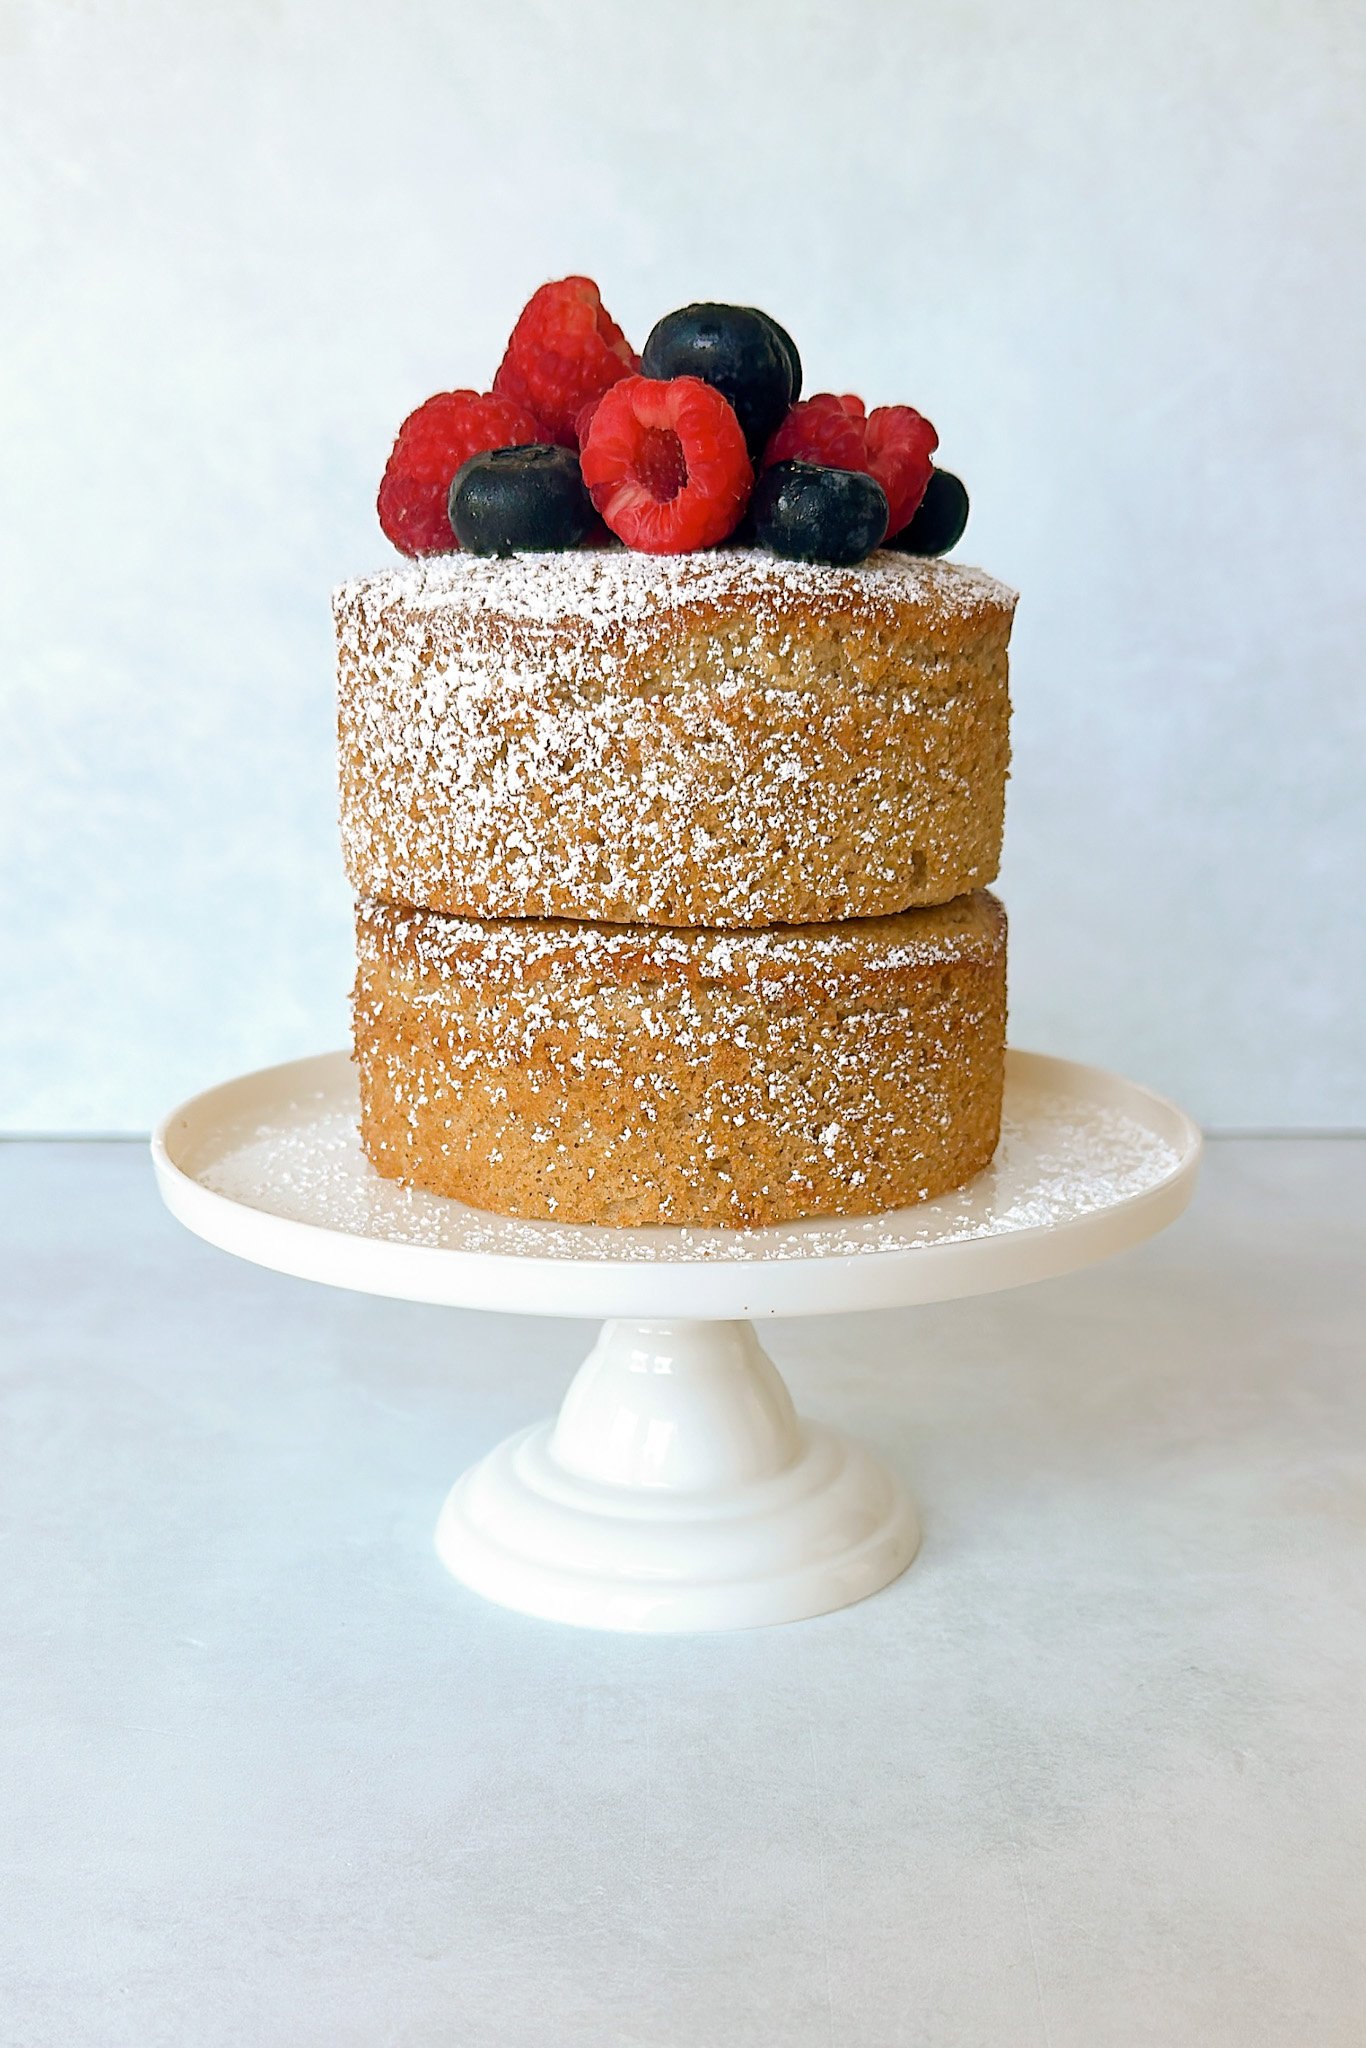 Apple almond cake on a cake stand topped with fresh berries.